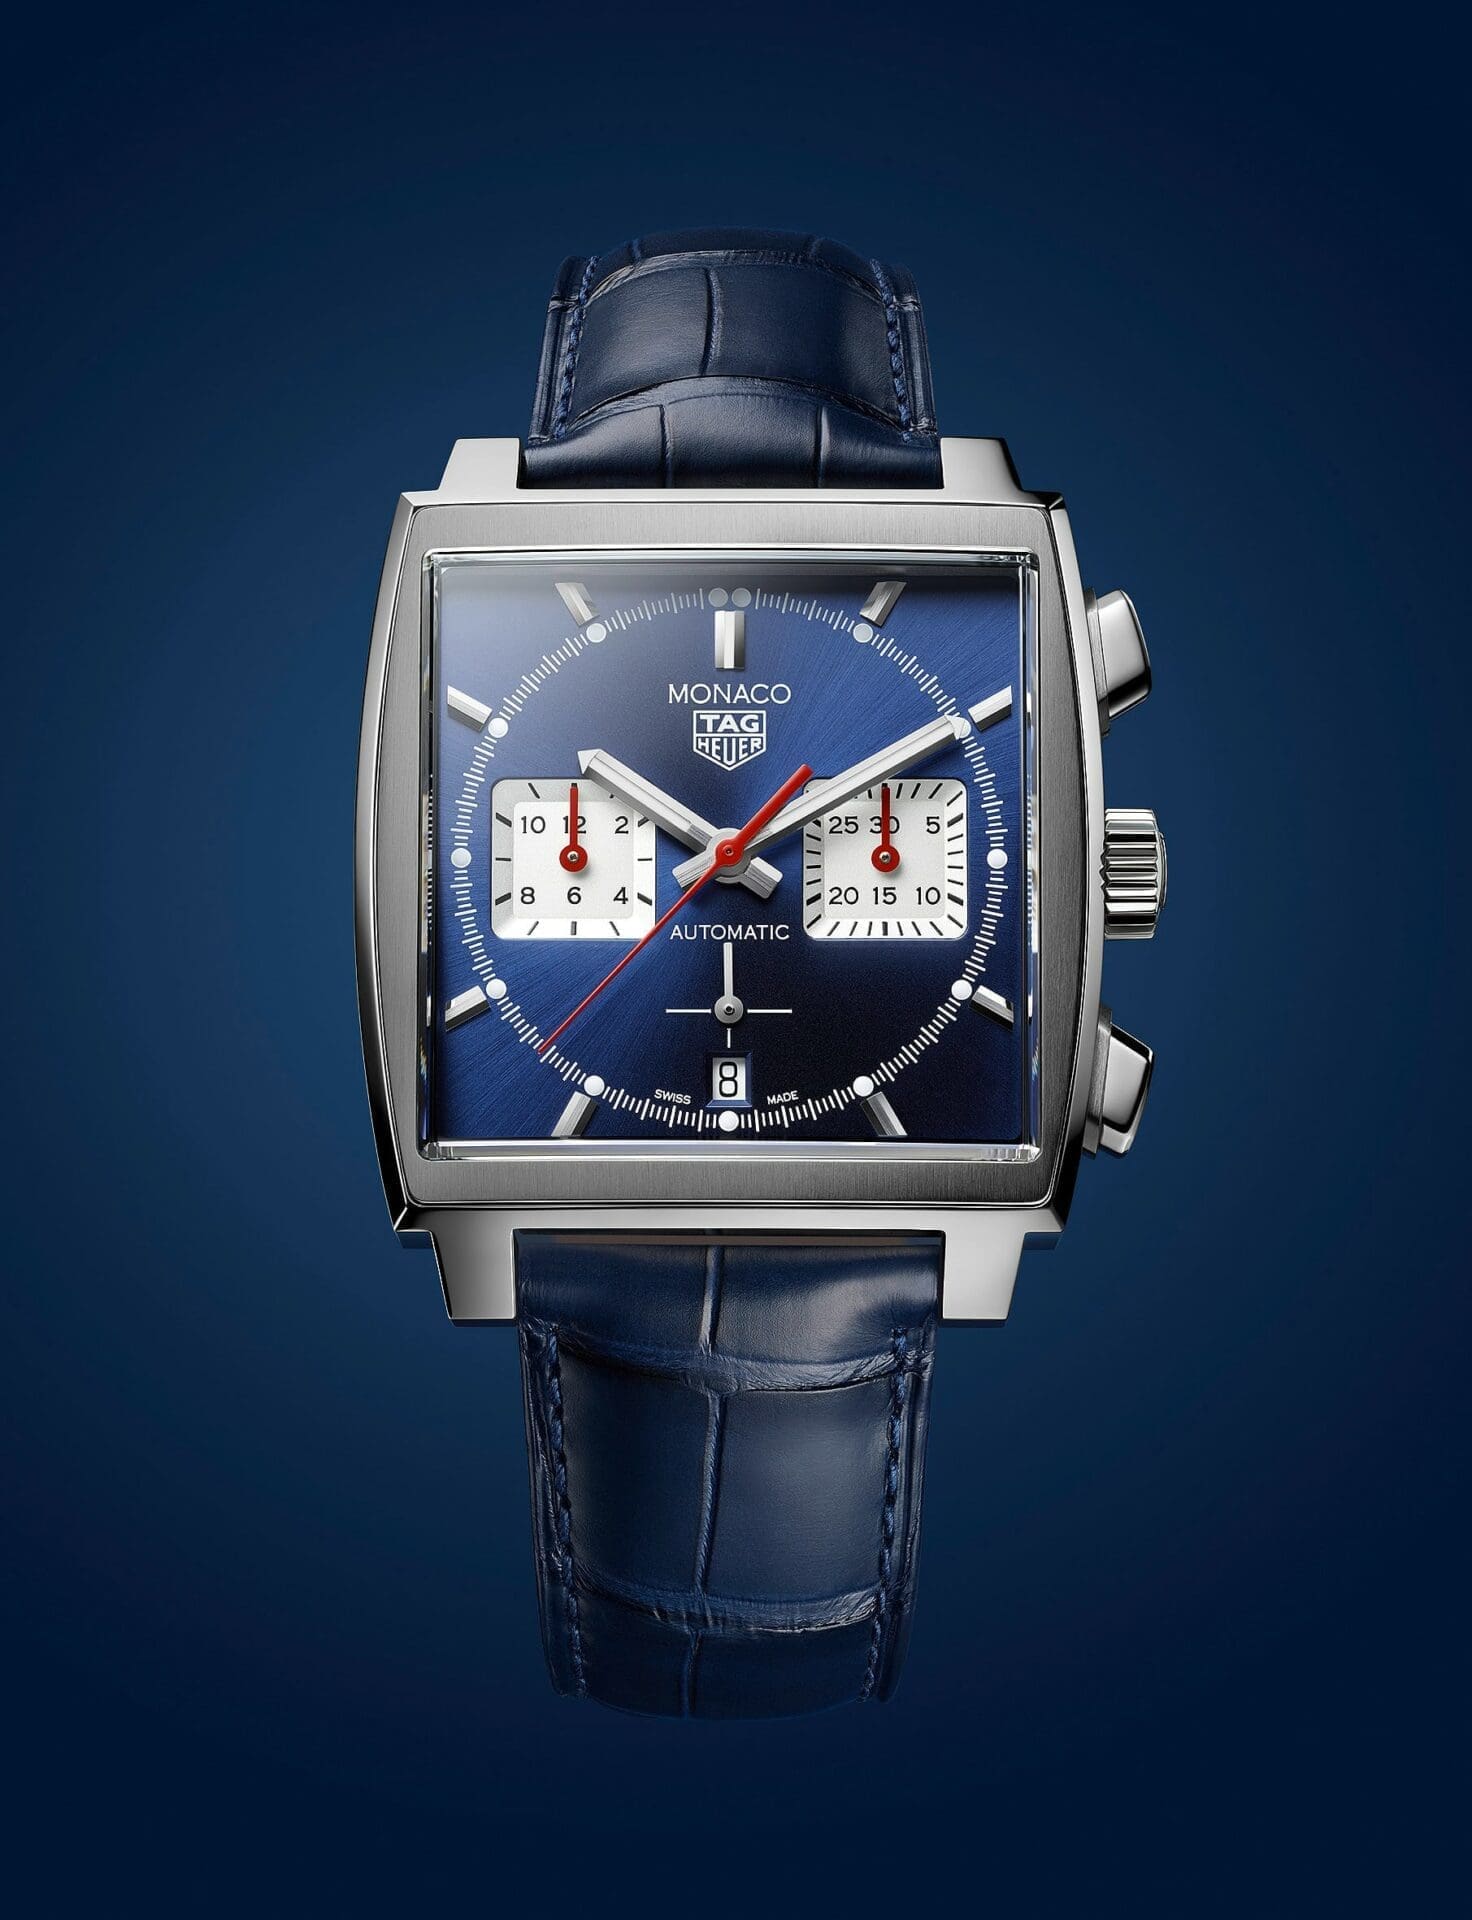 INTRODUCING: The TAG Heuer Monaco 02